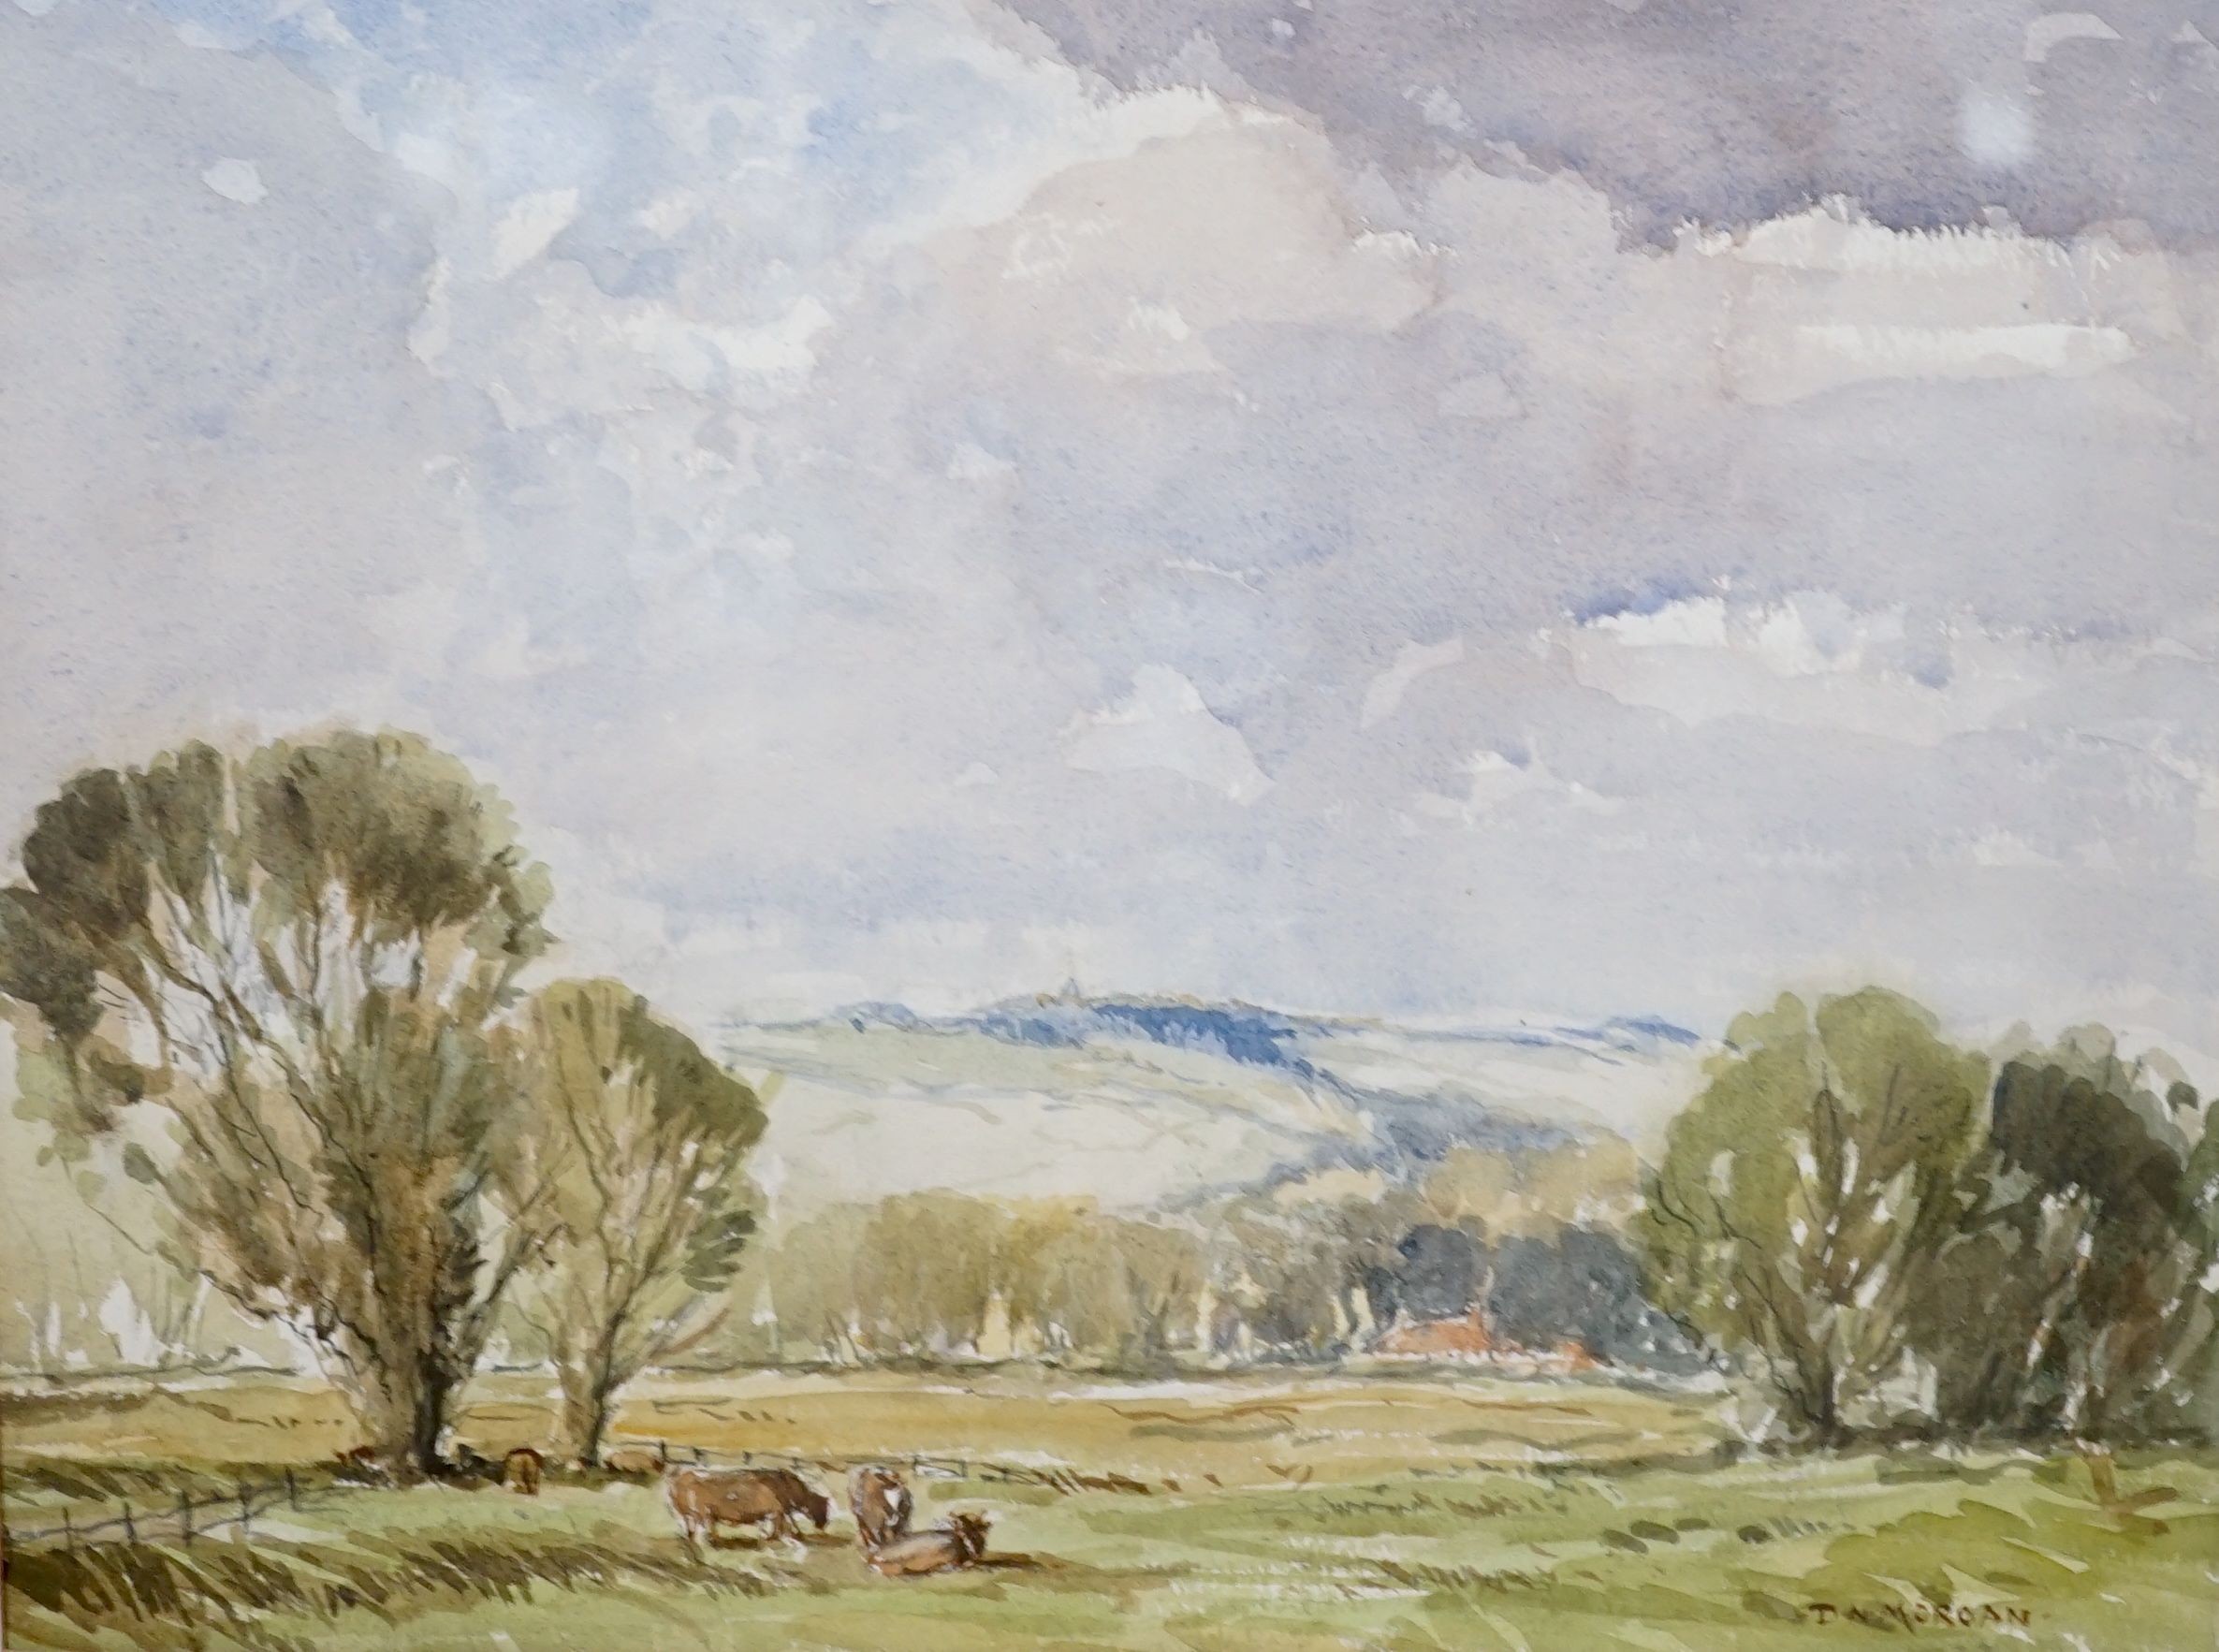 Lieutenant Colonel D N Morgan (20th century), two watercolours, Mayfield and Mickleham Priory, 31 cm x 41 cm